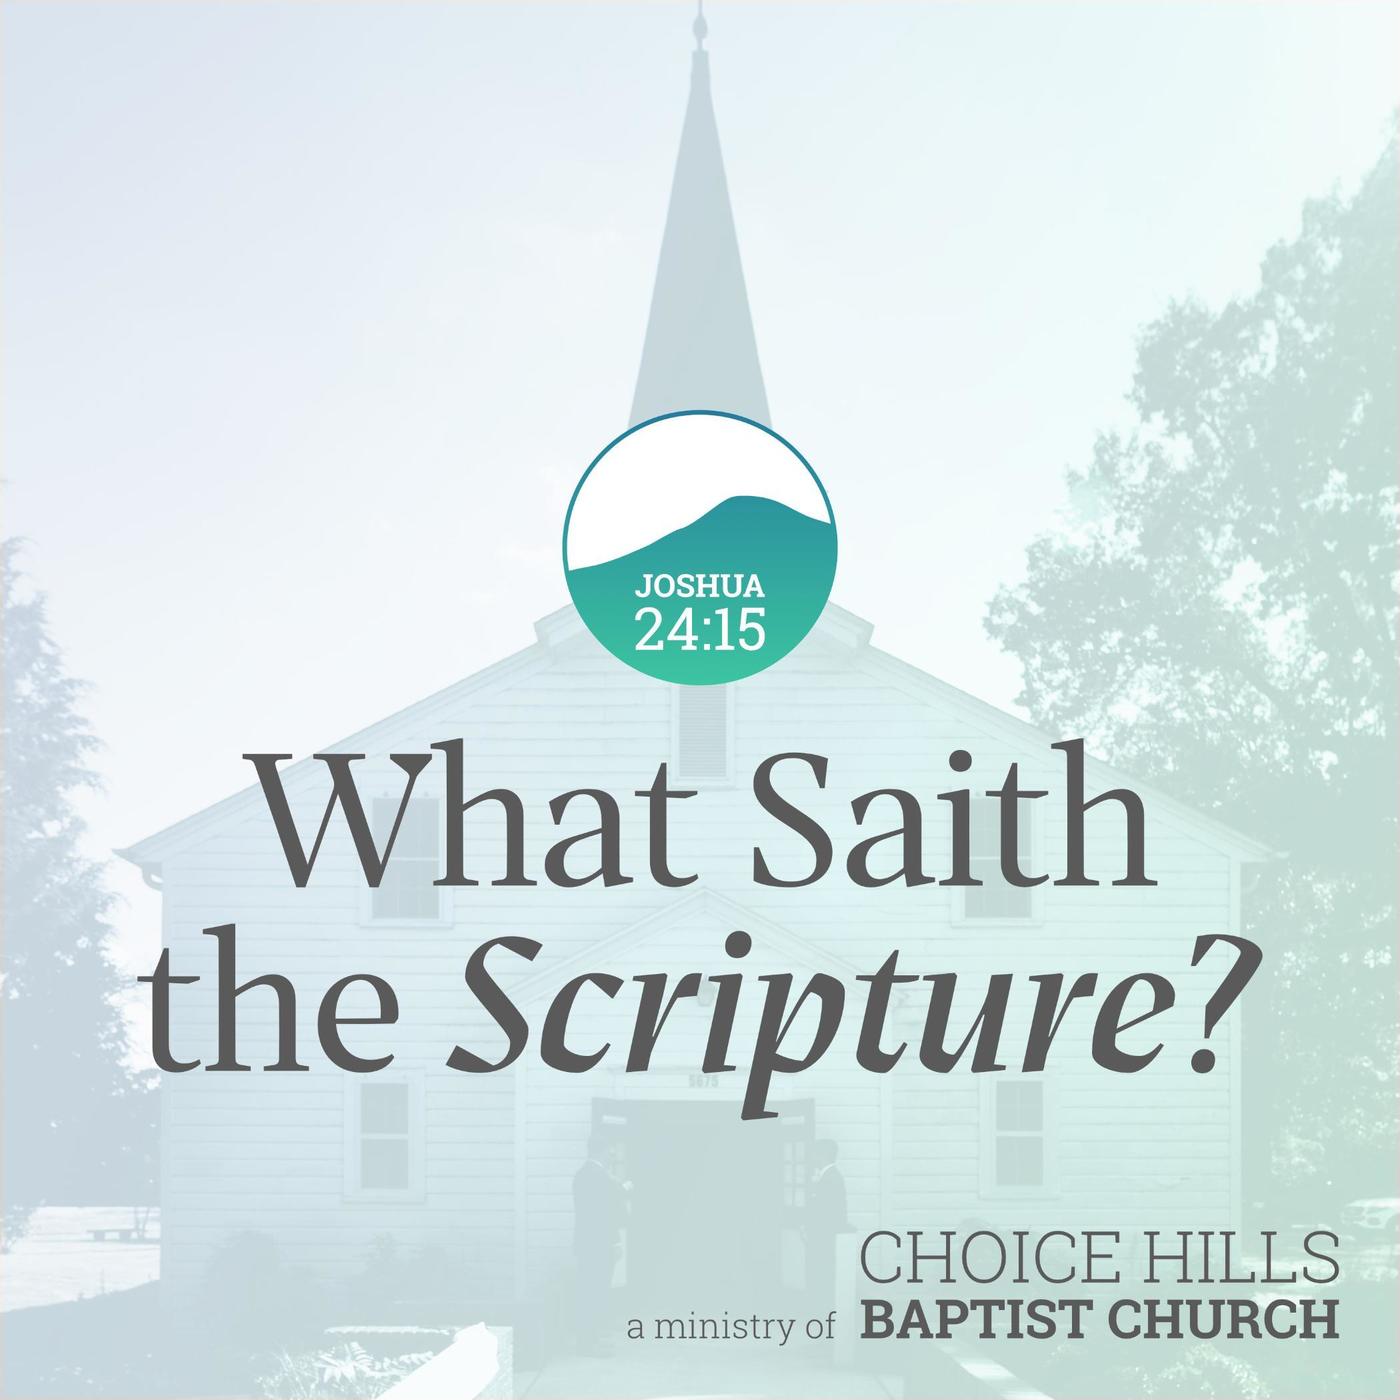 Adult Sunday School: Study of the 119th Psalm (Part 1)